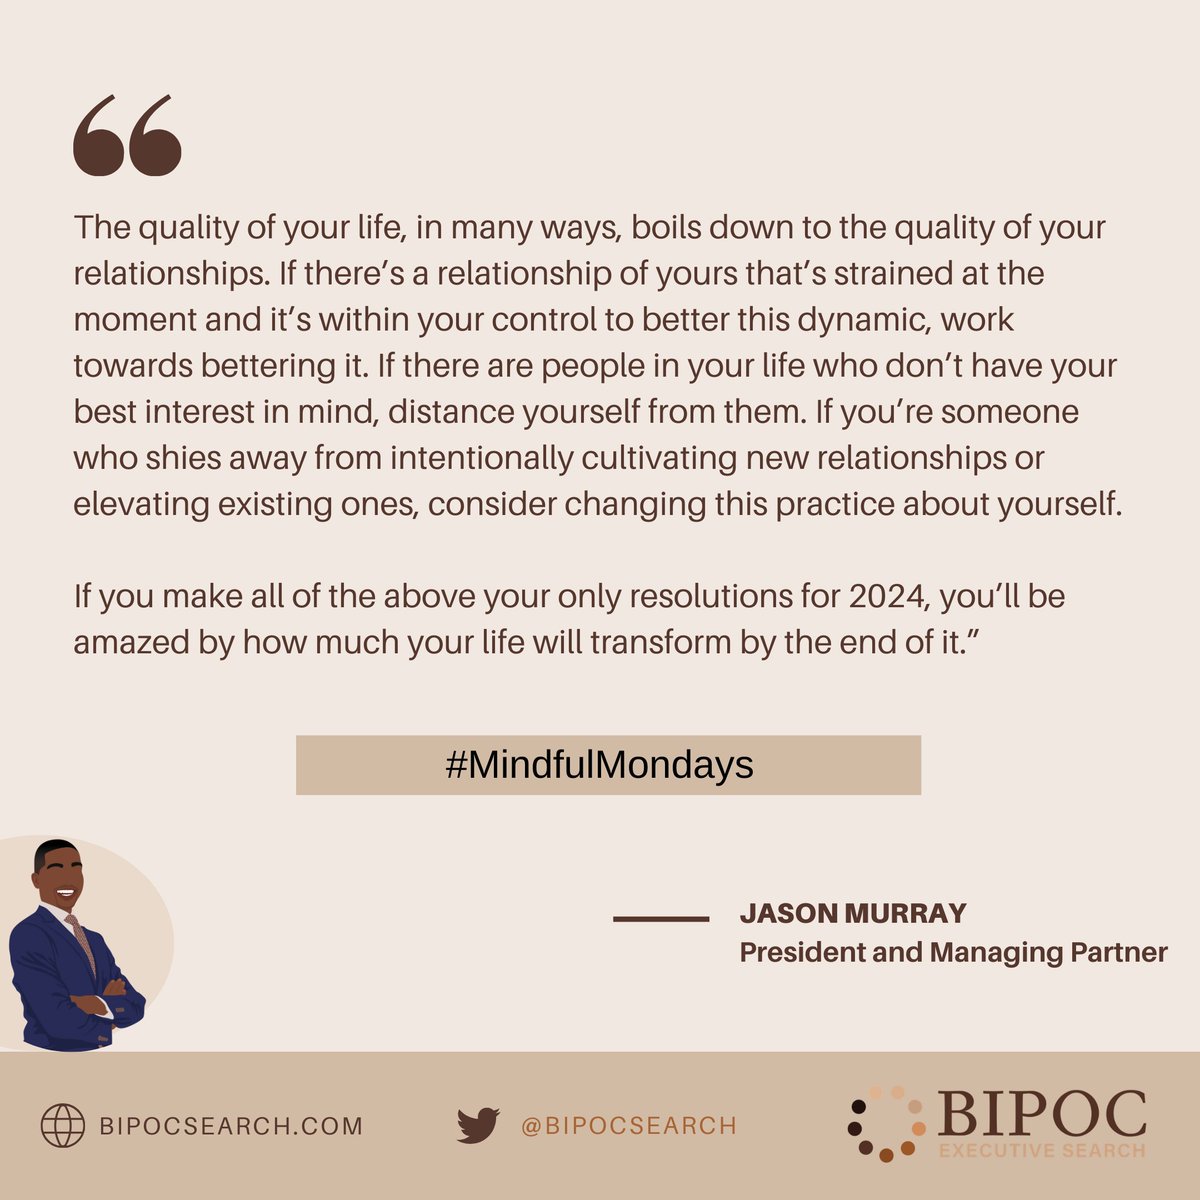 To round off our last #MindfulMonday quote for 2023, our President and Managing Partner, Jason Murray, leaves you with a timely and beautiful message.

#MindfulQuote #ExperiencesThatMatter #BipocExecutiveSearch #JasonMurray